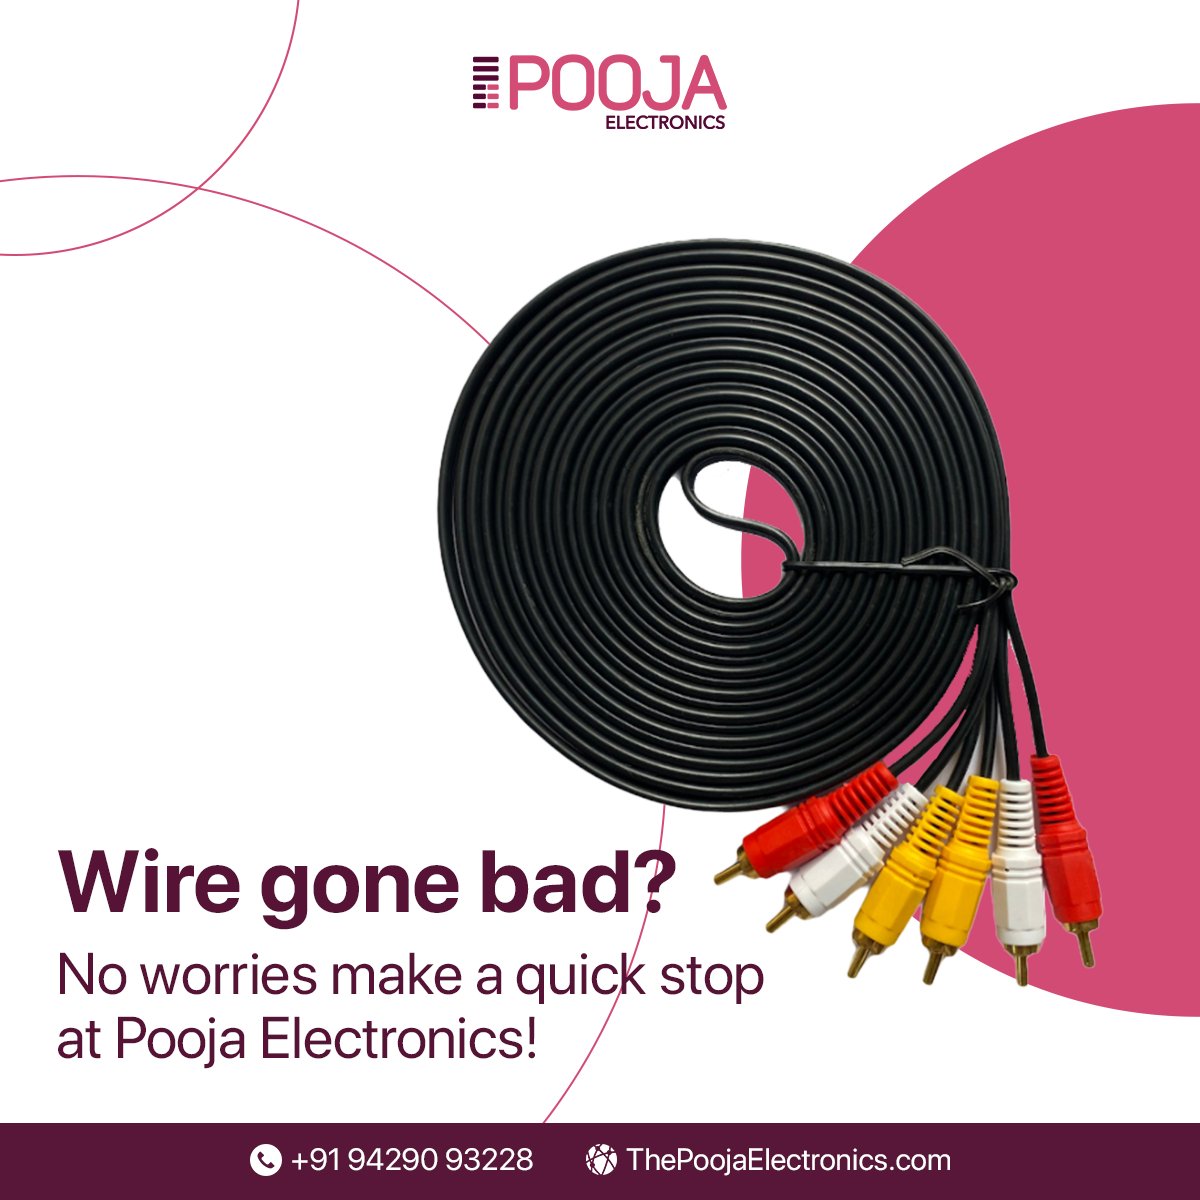 Expertly repair all your electronic needs!! Call the Pooja Electronics.
.
#poojaelectronics #electronicitems #ExpertRepairs #QualityService #smartliving #ElectronicsSpecialist #PowerUp #AffordableRepairs #technology #WiredForSuccess #DeviceRestoration #WeFixItAll #TrustedRepairs